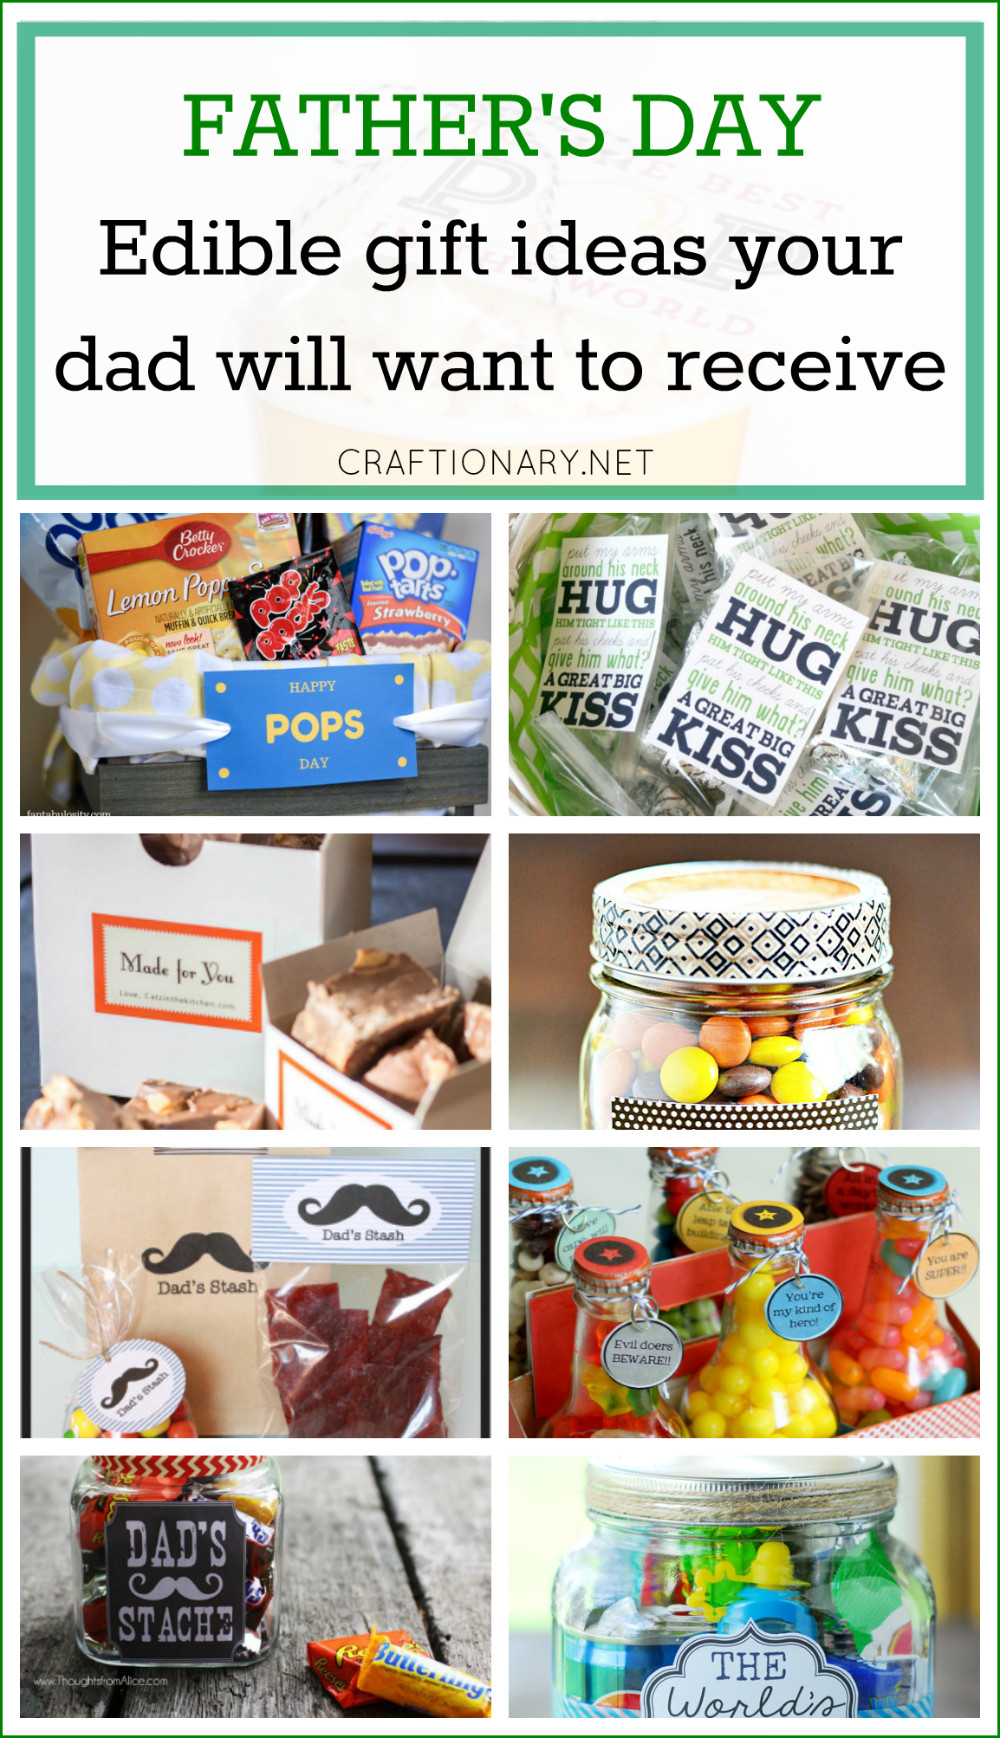 Father'S Day Gardening Gift Ideas
 20 Edible Gift Ideas for Father s Day that your dad will